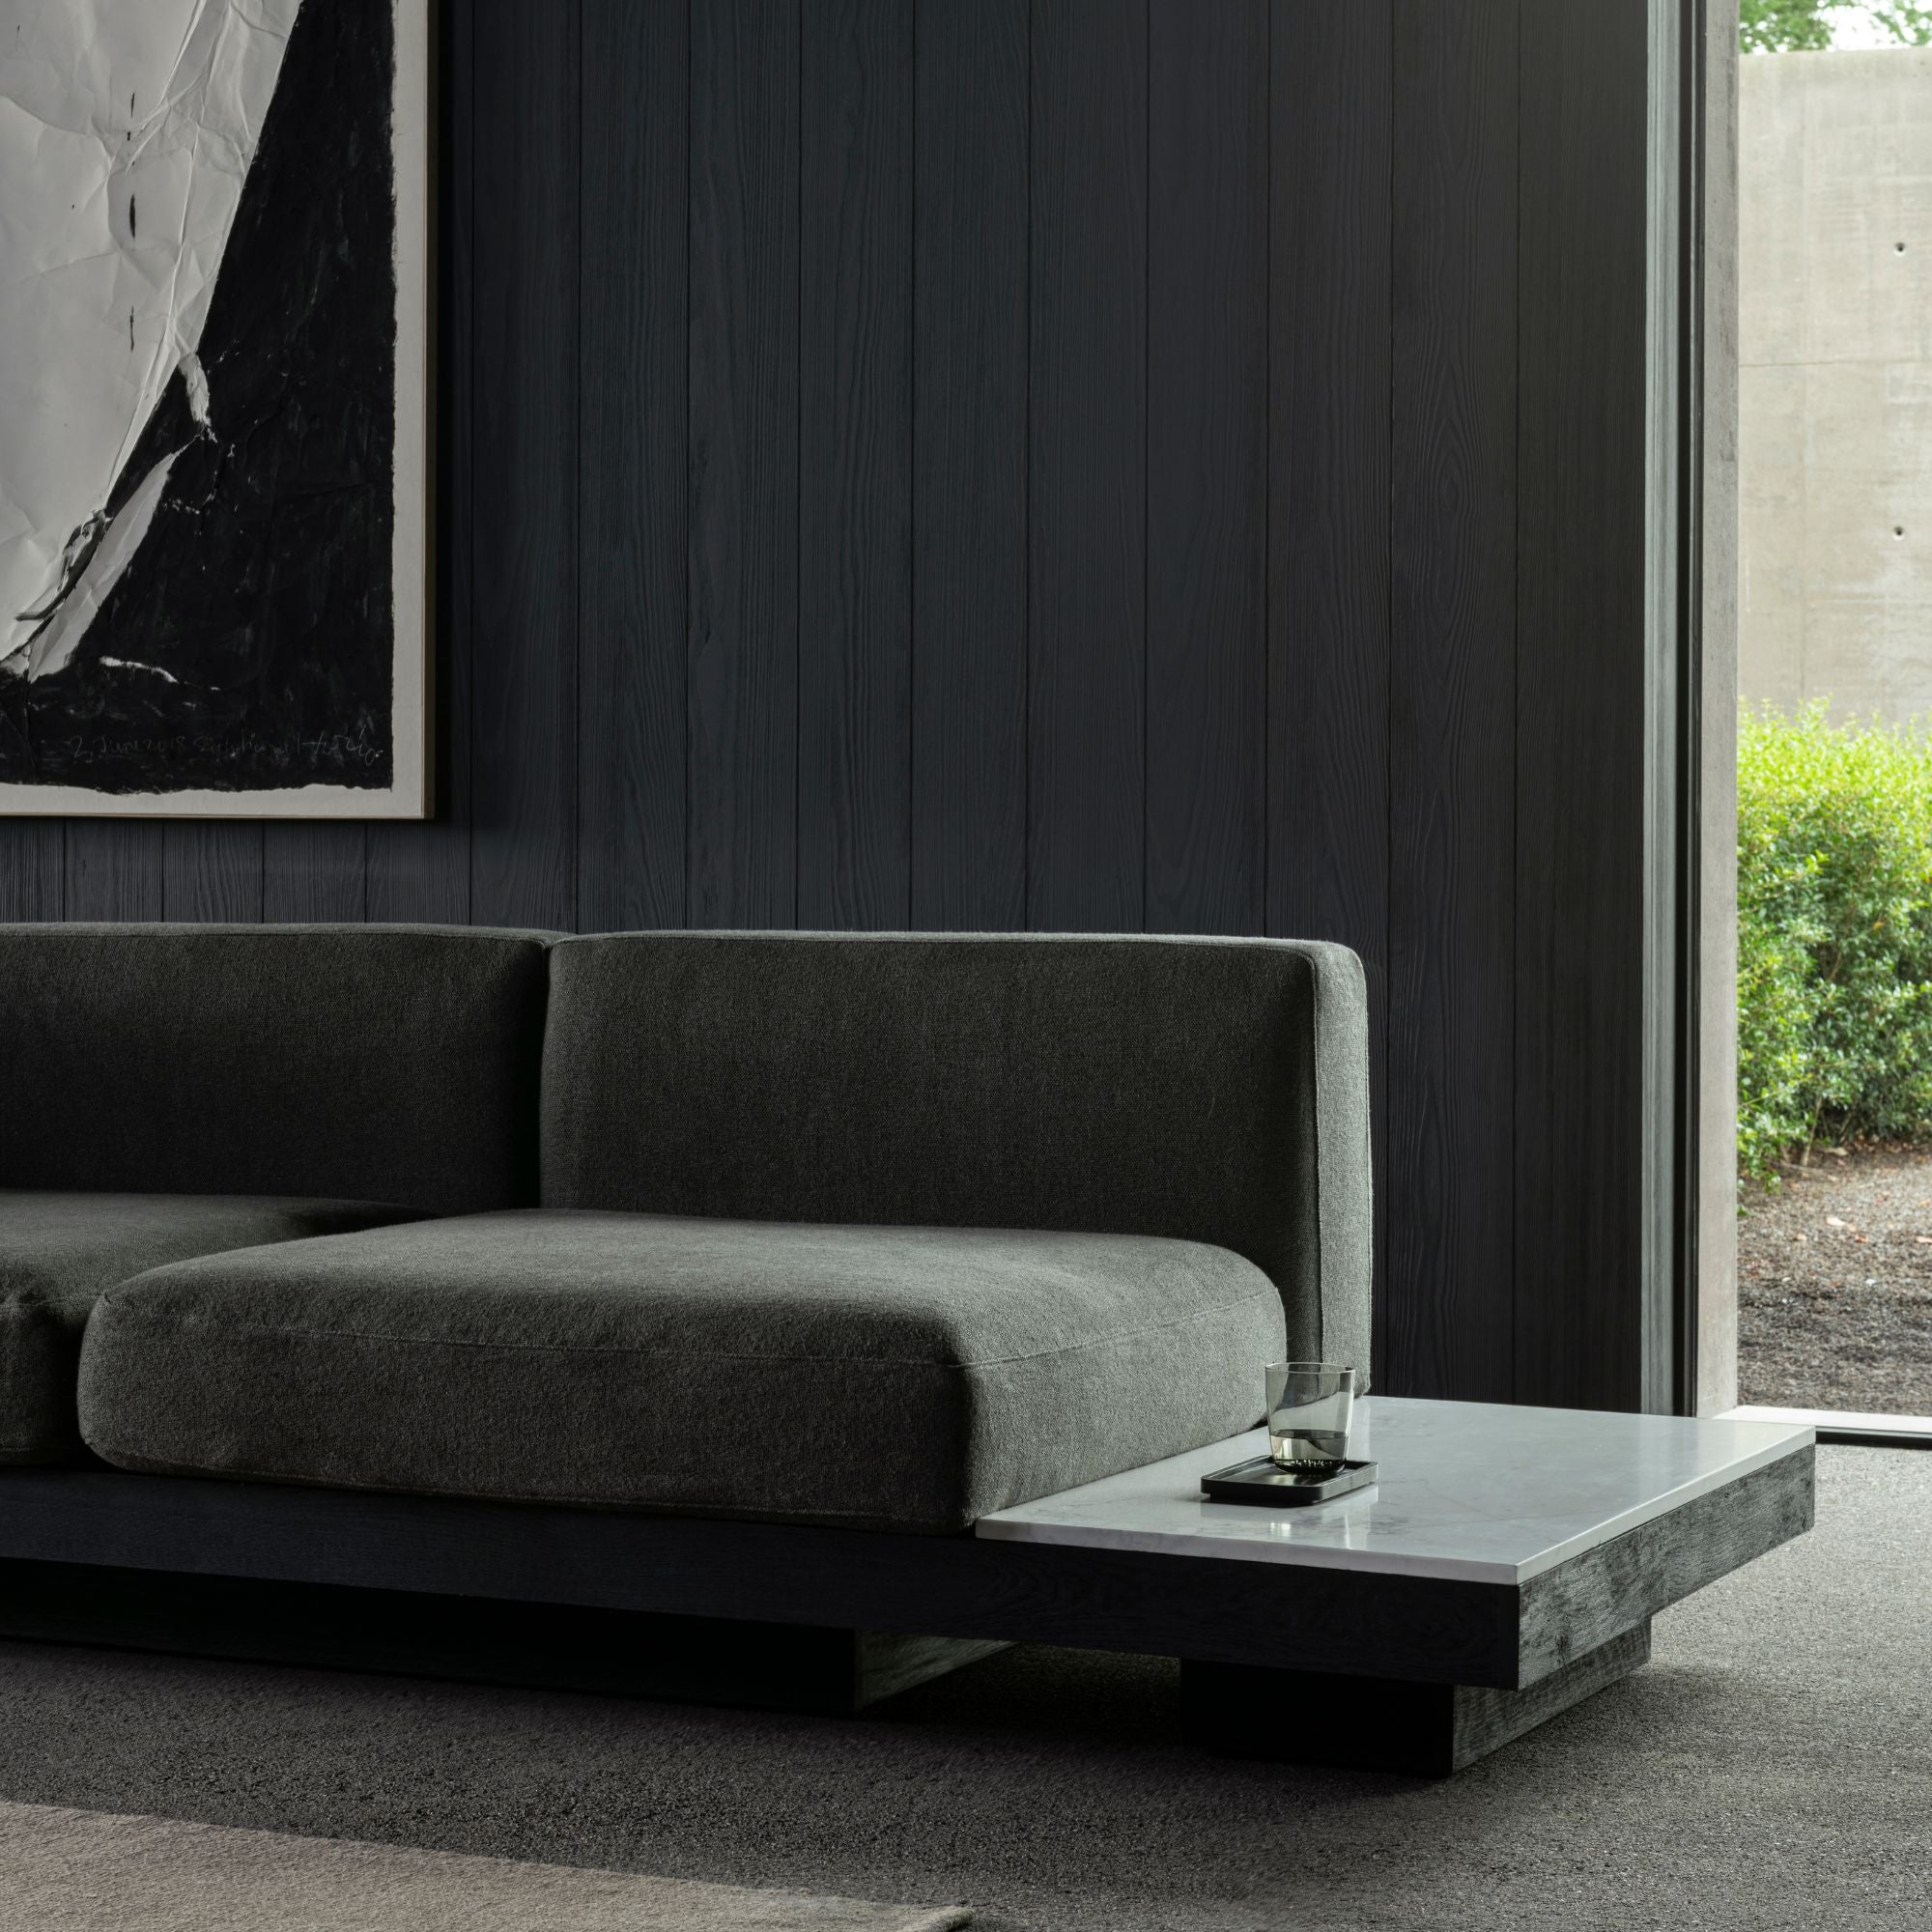 Rudolph 2-seater Sofa - THAT COOL LIVING